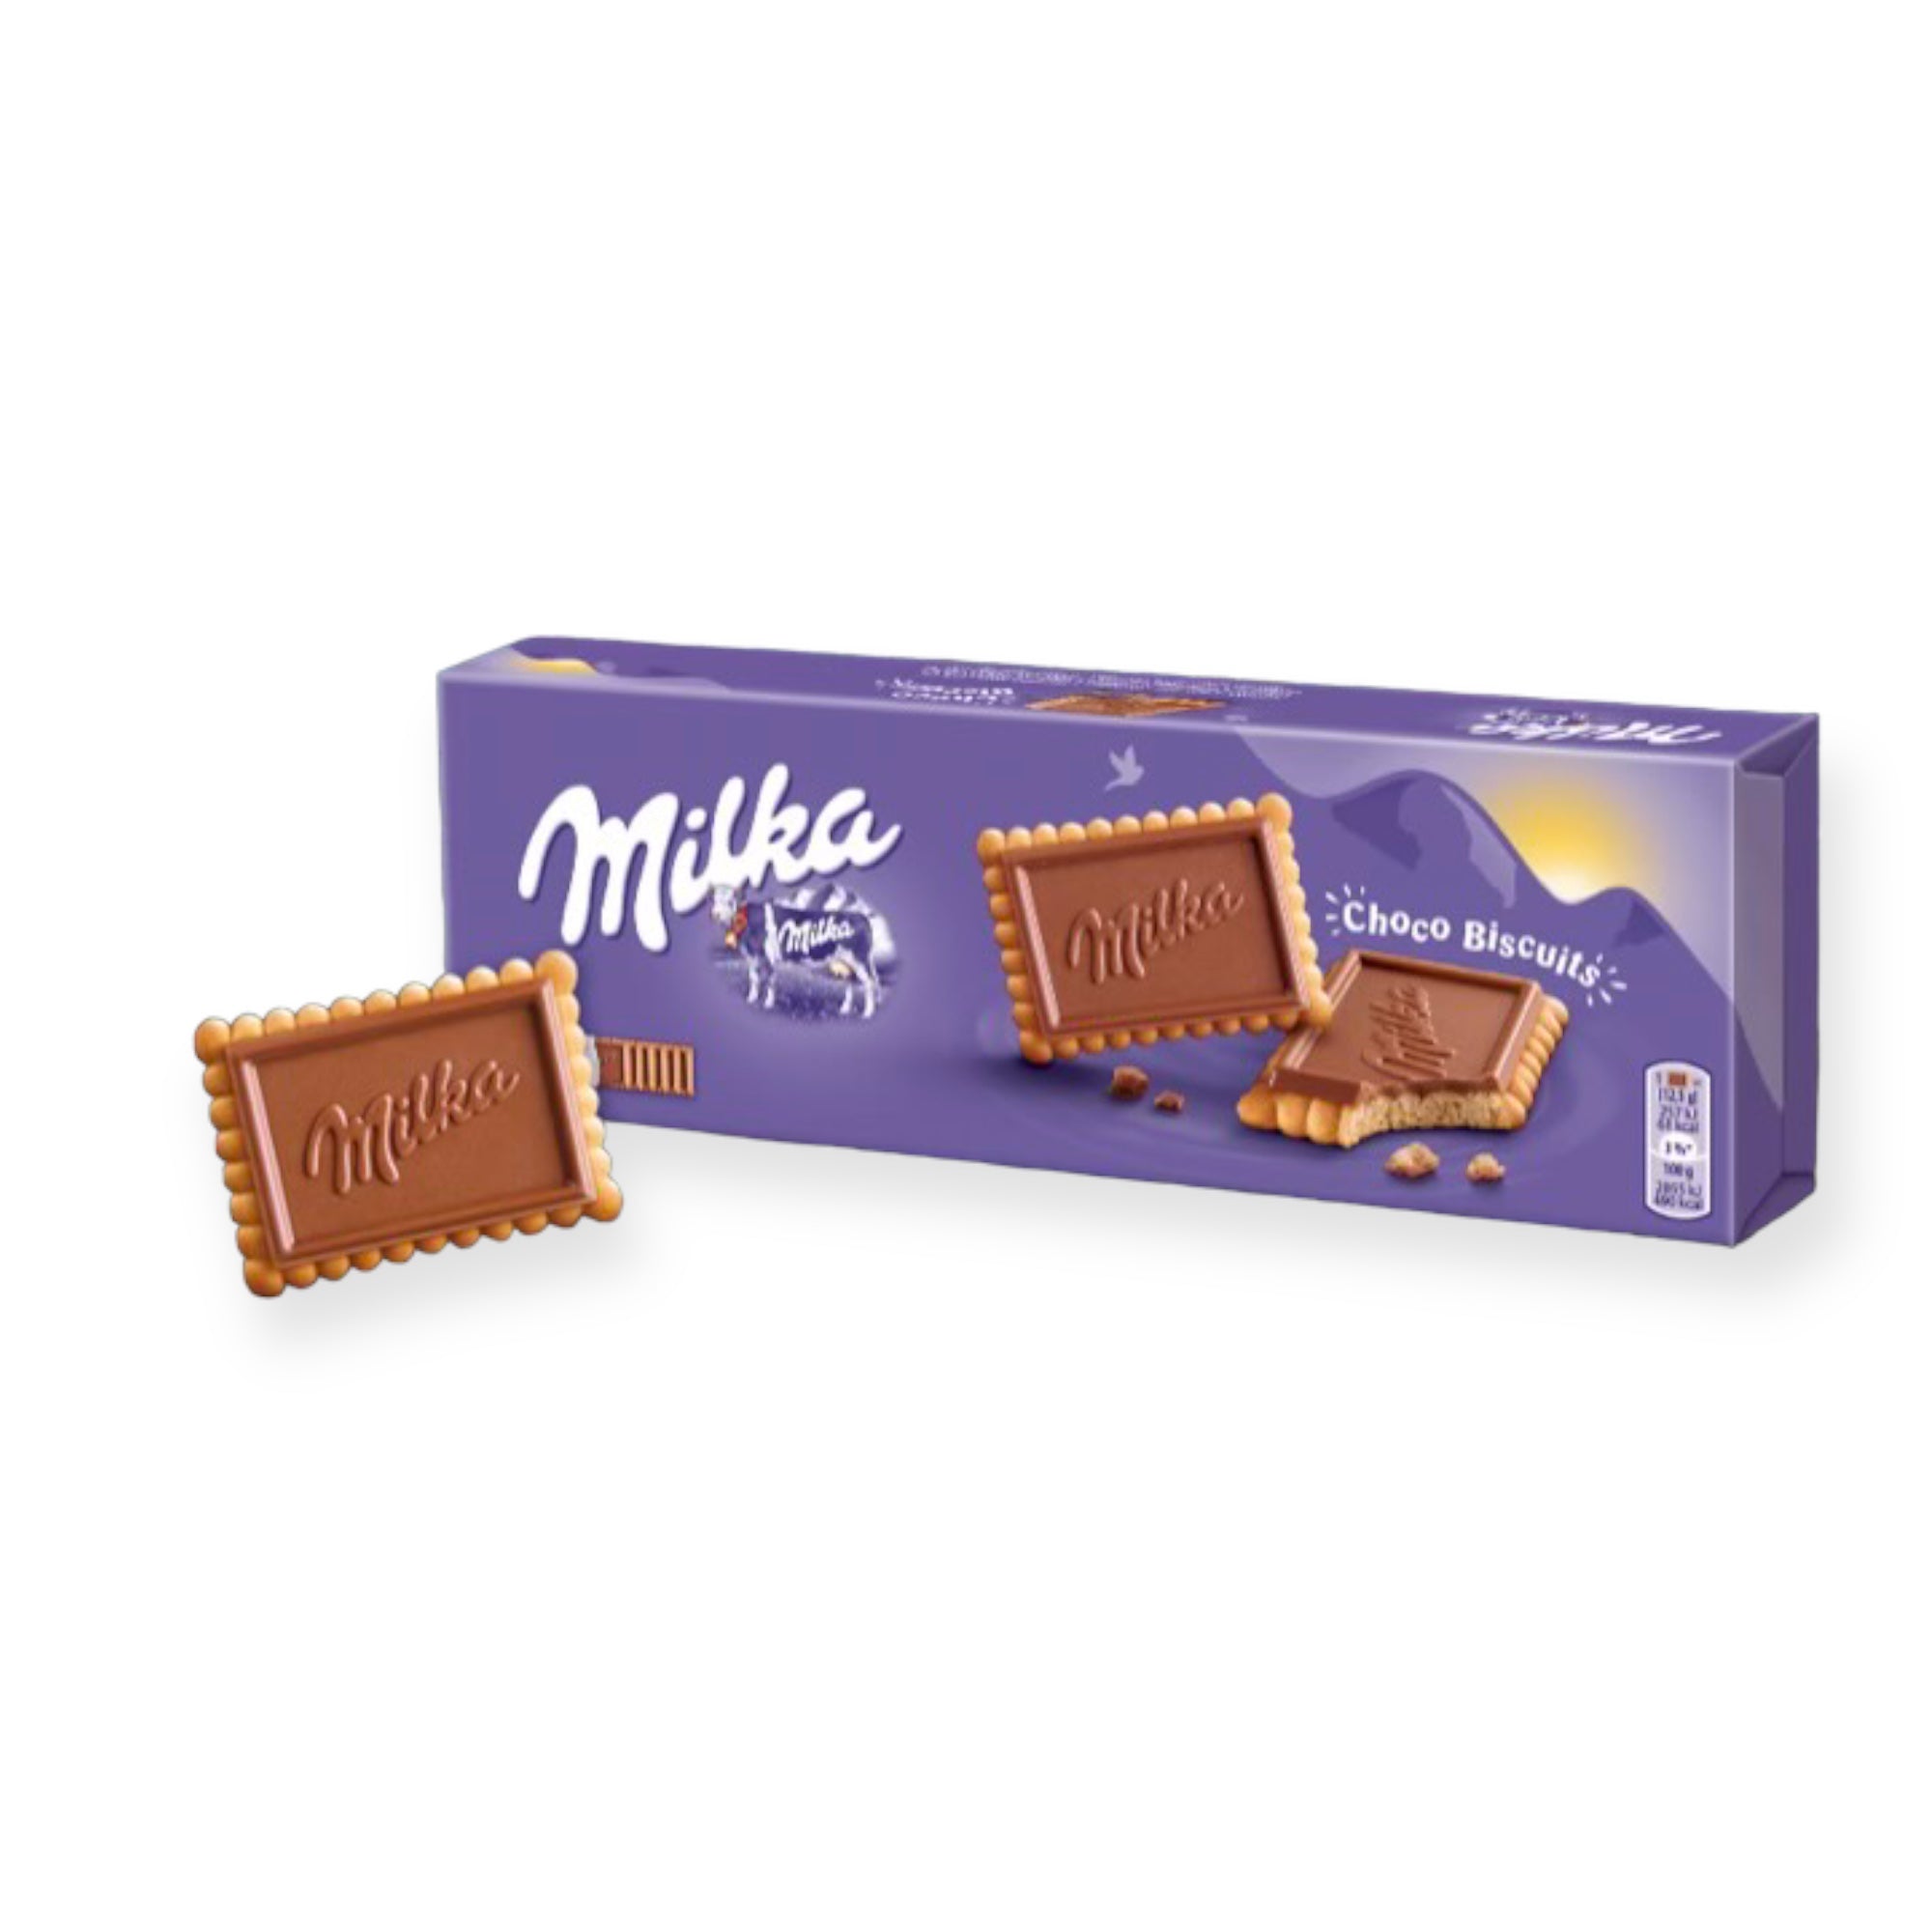 Milka Orange Jaffa Cakes 147 g - Sandwich Biscuits - Biscuits & Crackers -  Pantry - Products - Supermercado Apolónia